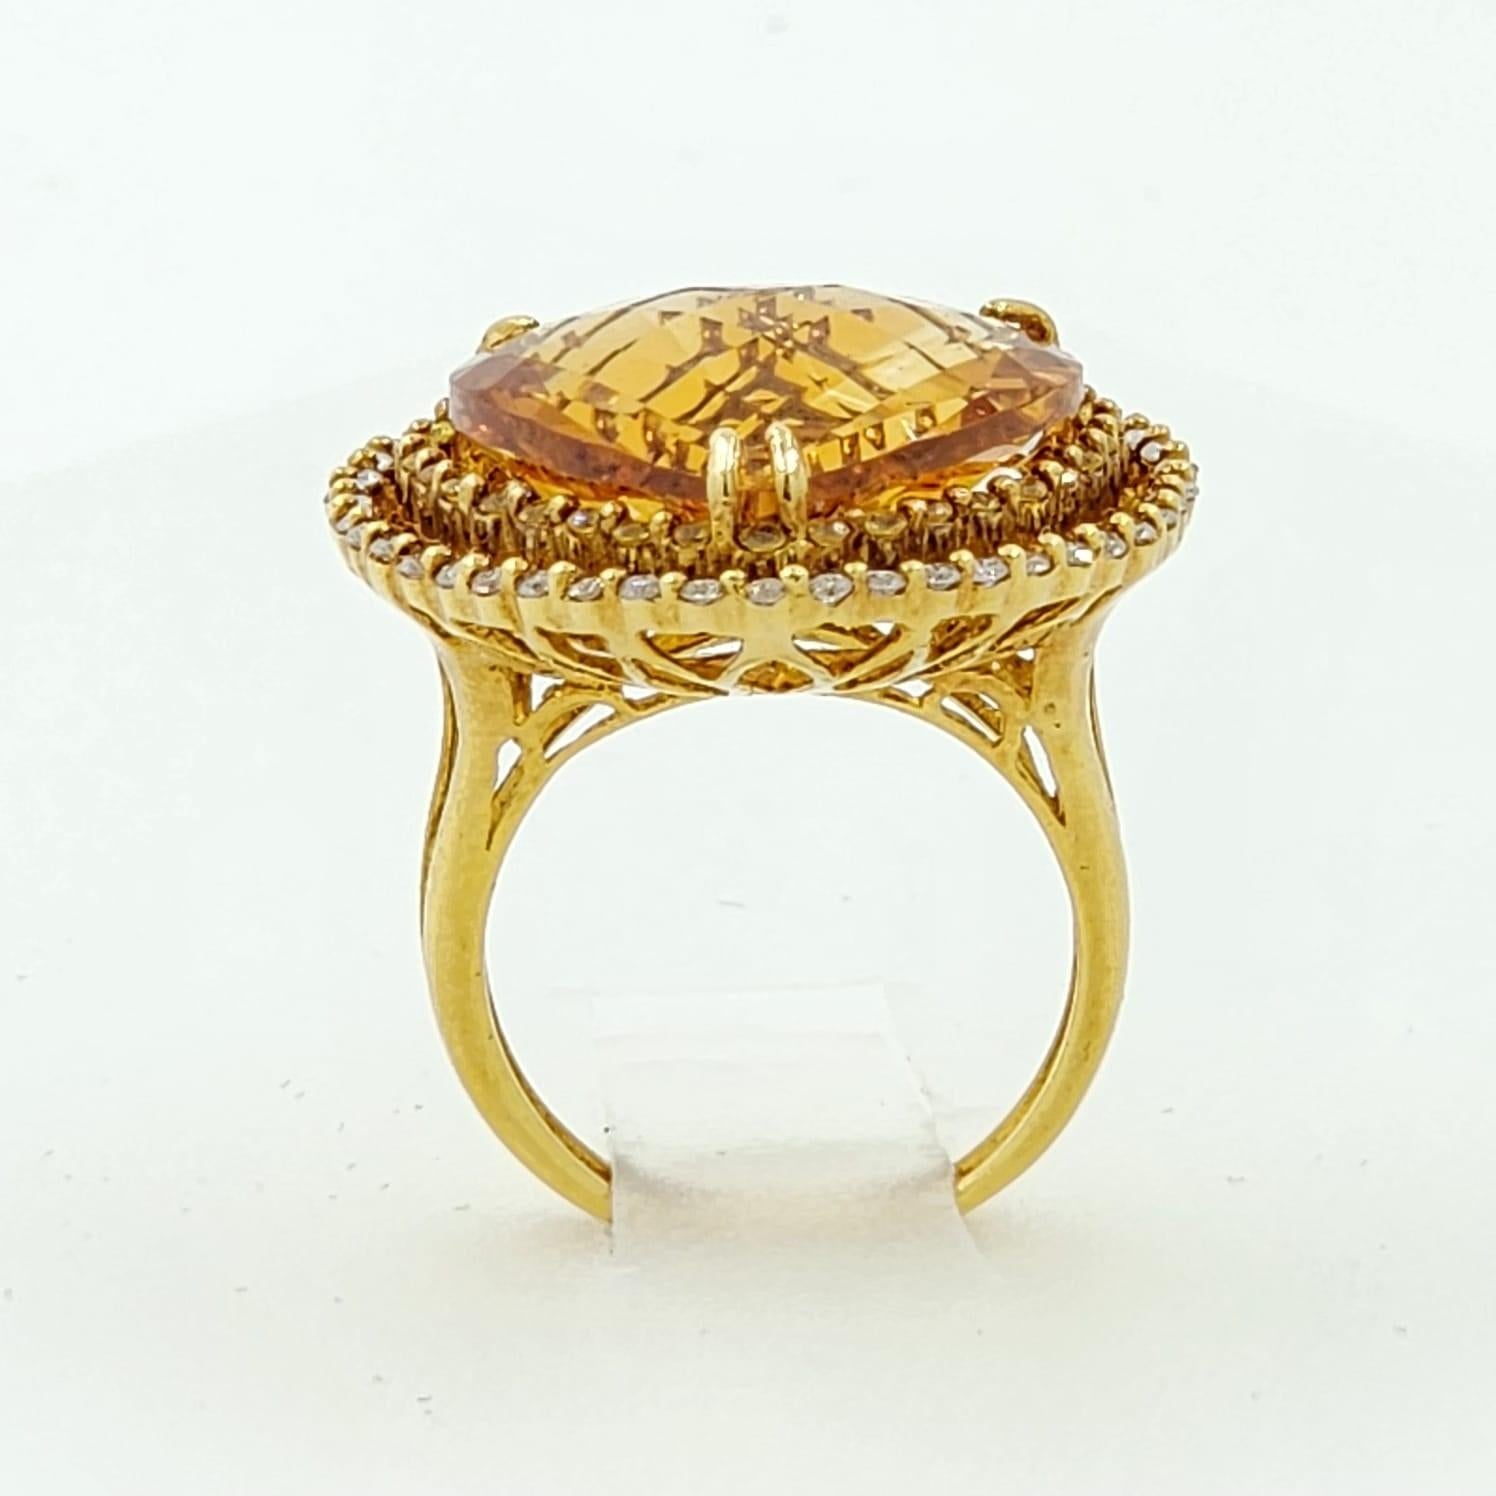 Contemporary Vintage 14.81 Ct Citrine Heart Cut Diamond Cocktail Ring in 18 Karat Yellow Gold For Sale